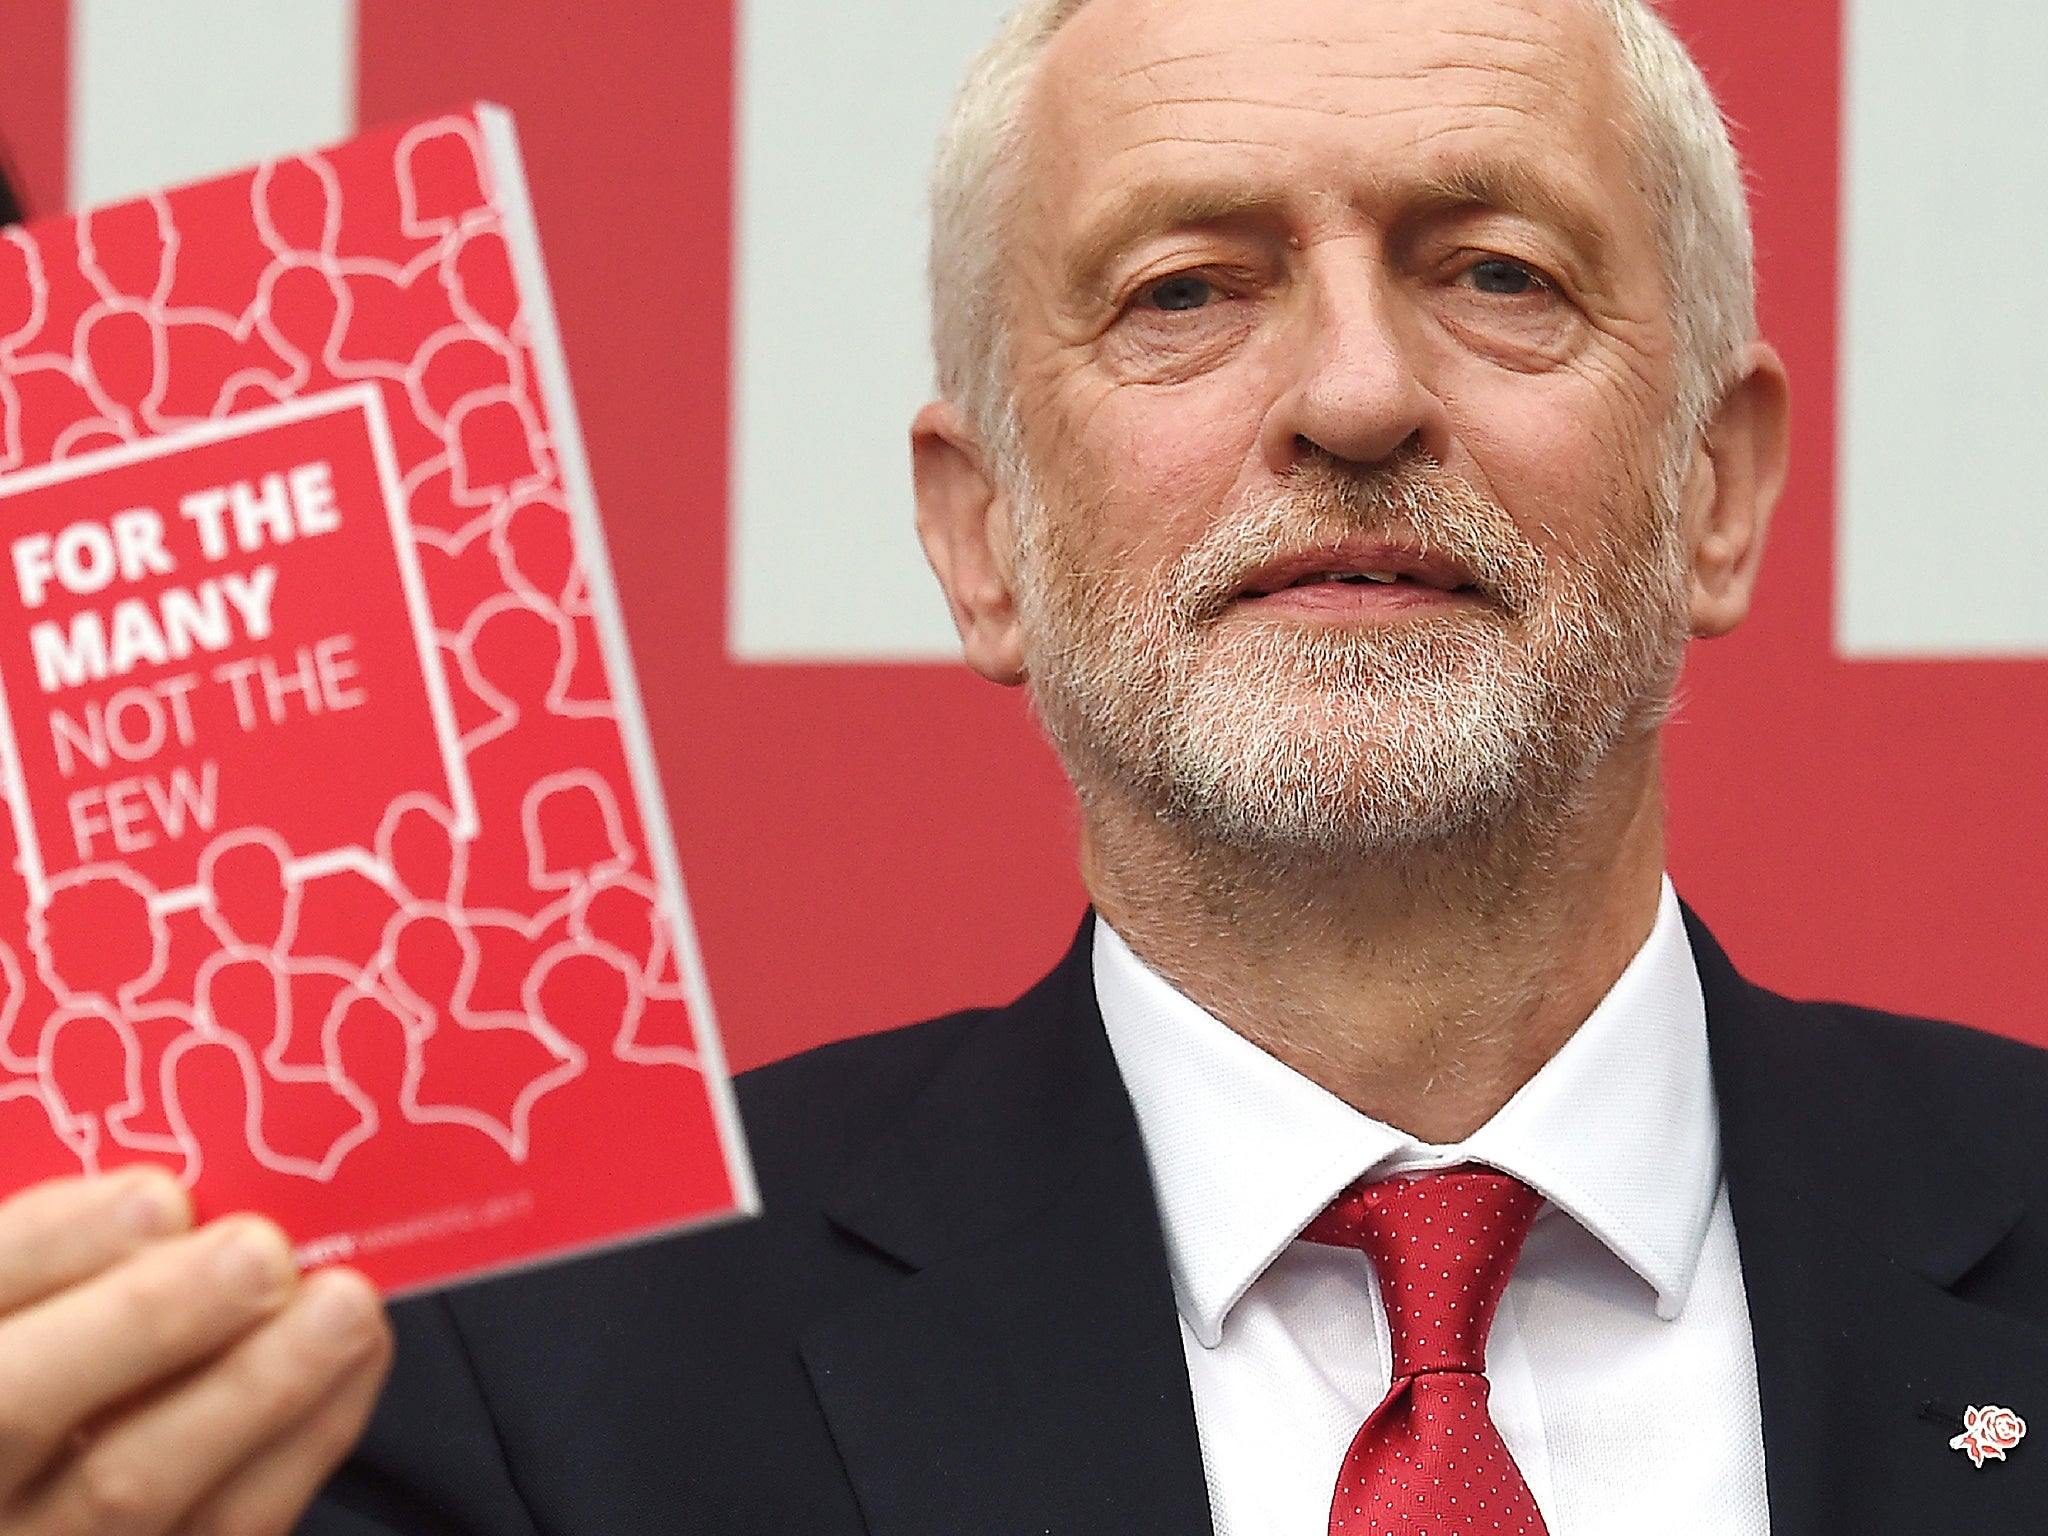 Jeremy Corbyn unveiled the Labour election manifesto in Bradford